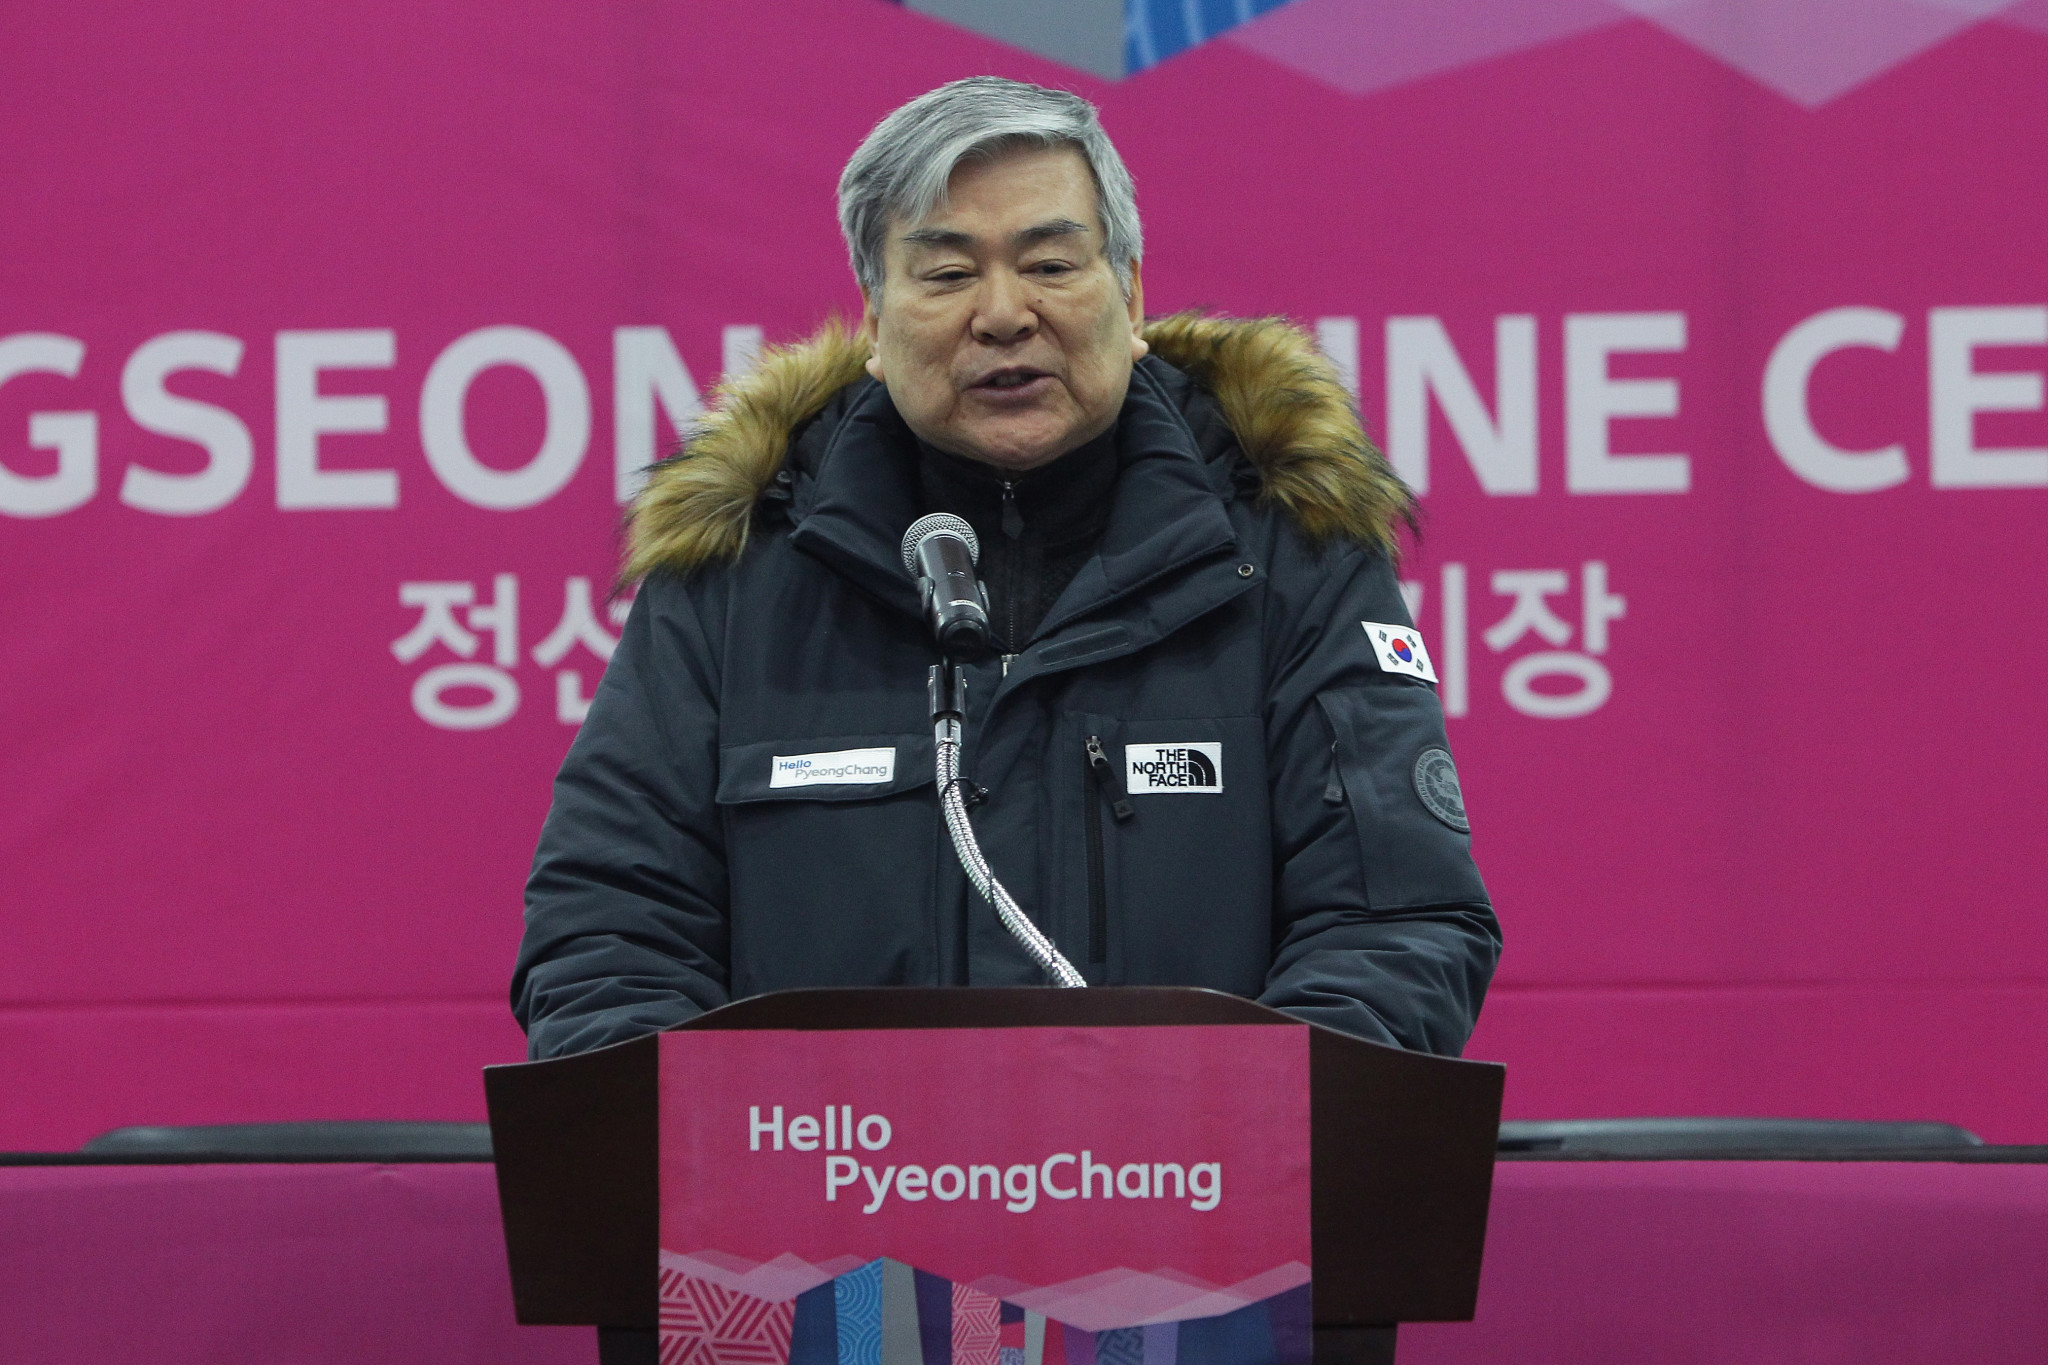 Yang Ho Cho returned briefly as President of the Organising Committee for Pyeongchang 2018 but was forced out in 2016 after being a victim of the political cronyism scandal which caused a crisis in South Korea ©Getty Images